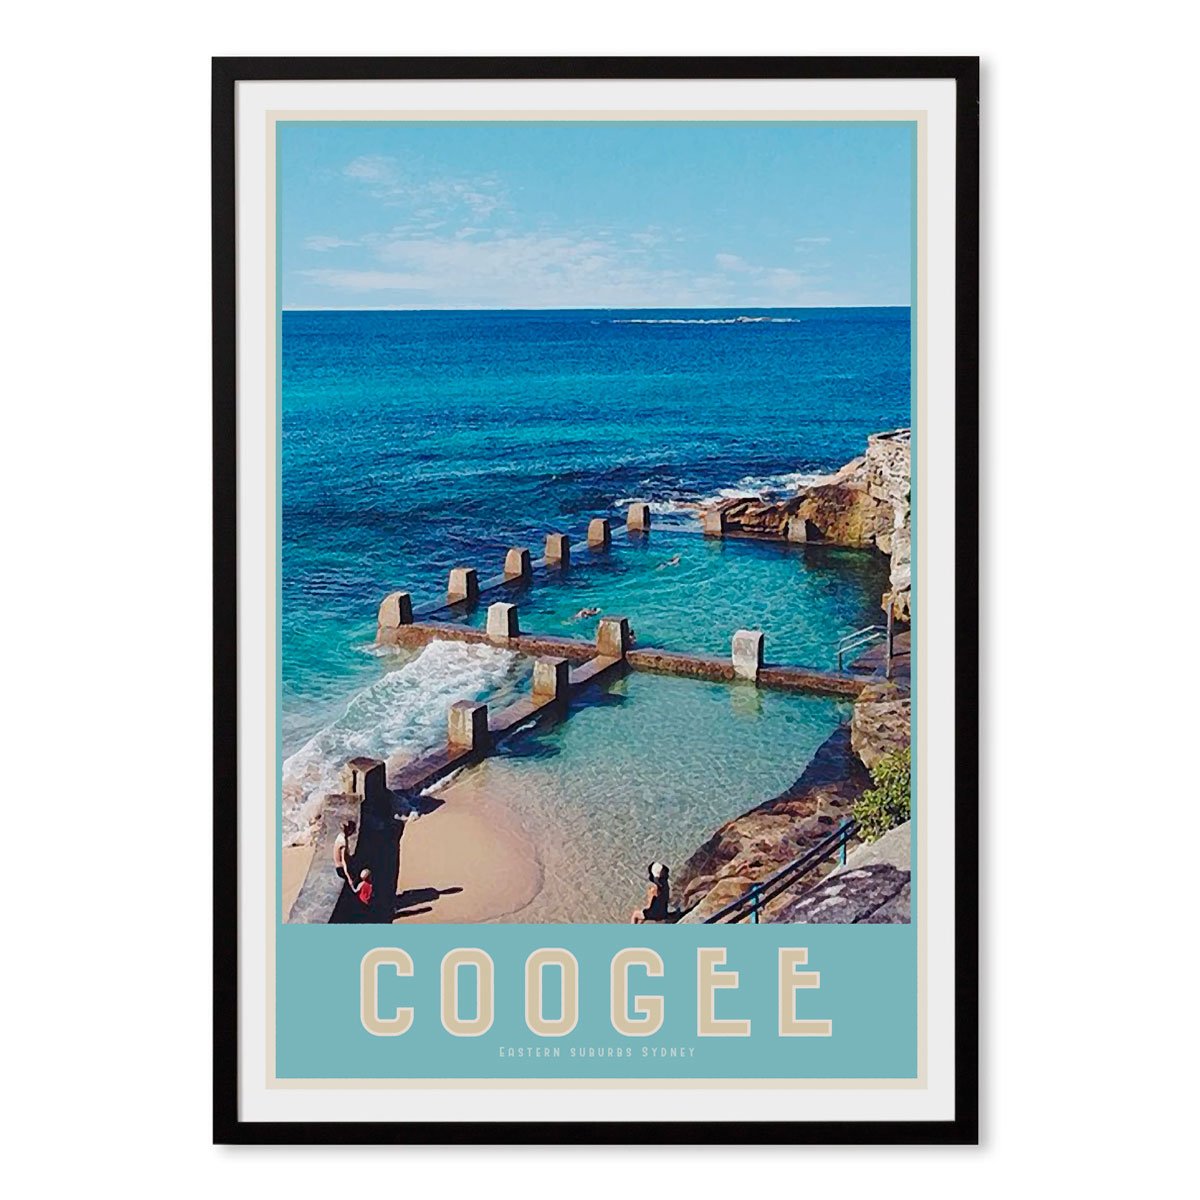 Coogee Pool vintage travel style black framed prints by places we luv